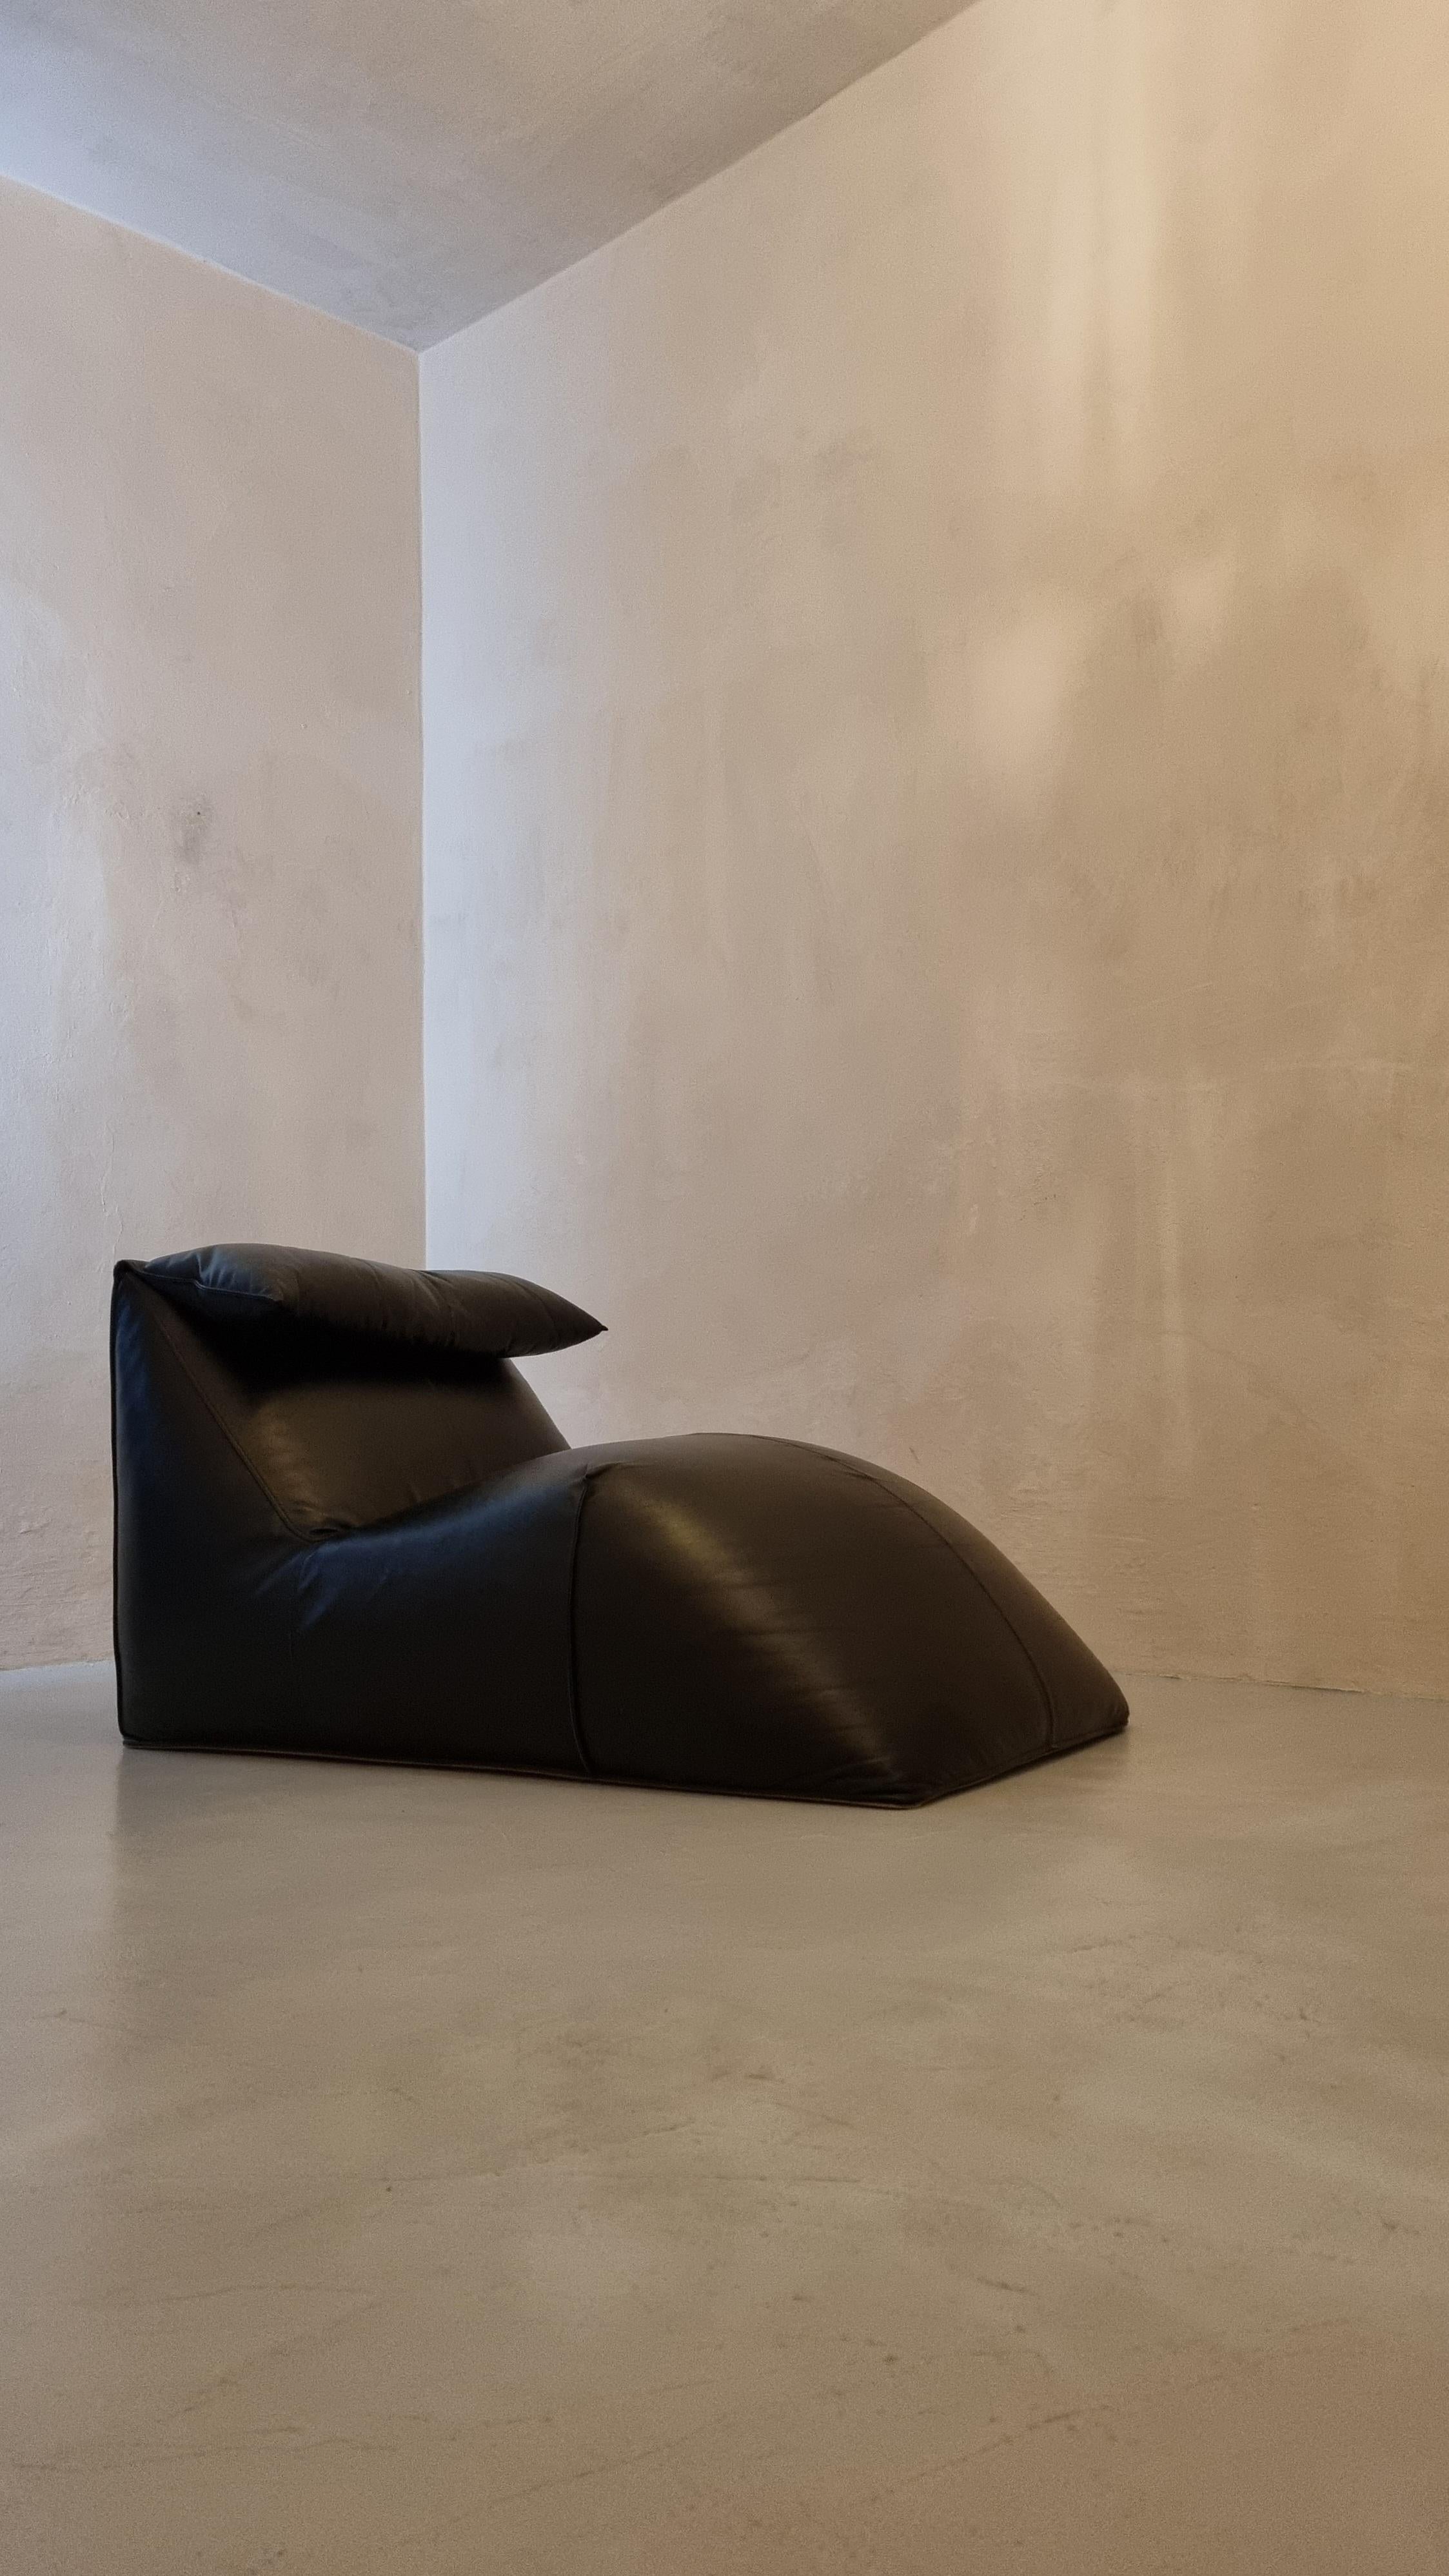 Le Bambole Chaise-Longue designed by Mario Bellini for B&B Italia, 1972.
The Bambole series won the Compasso d'Oro award in 1979. 
Le Bambole is an iconic piece of Italian design. included in the permanent collection of the MoMA in New York,